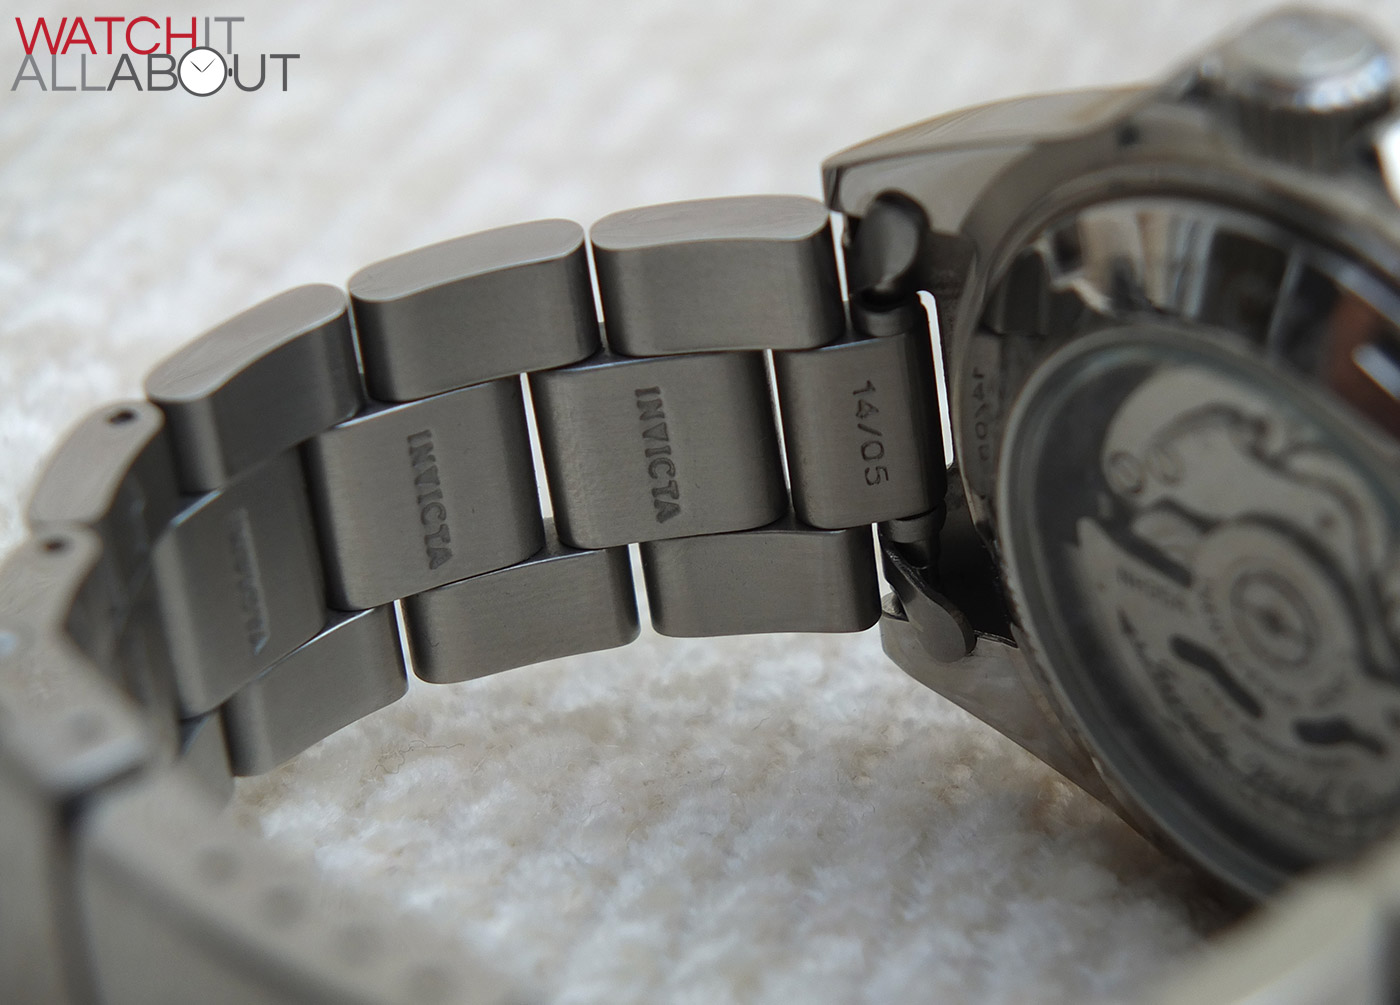 Invicta Pro Diver 9094 Watch Review - WatchReviewBlog